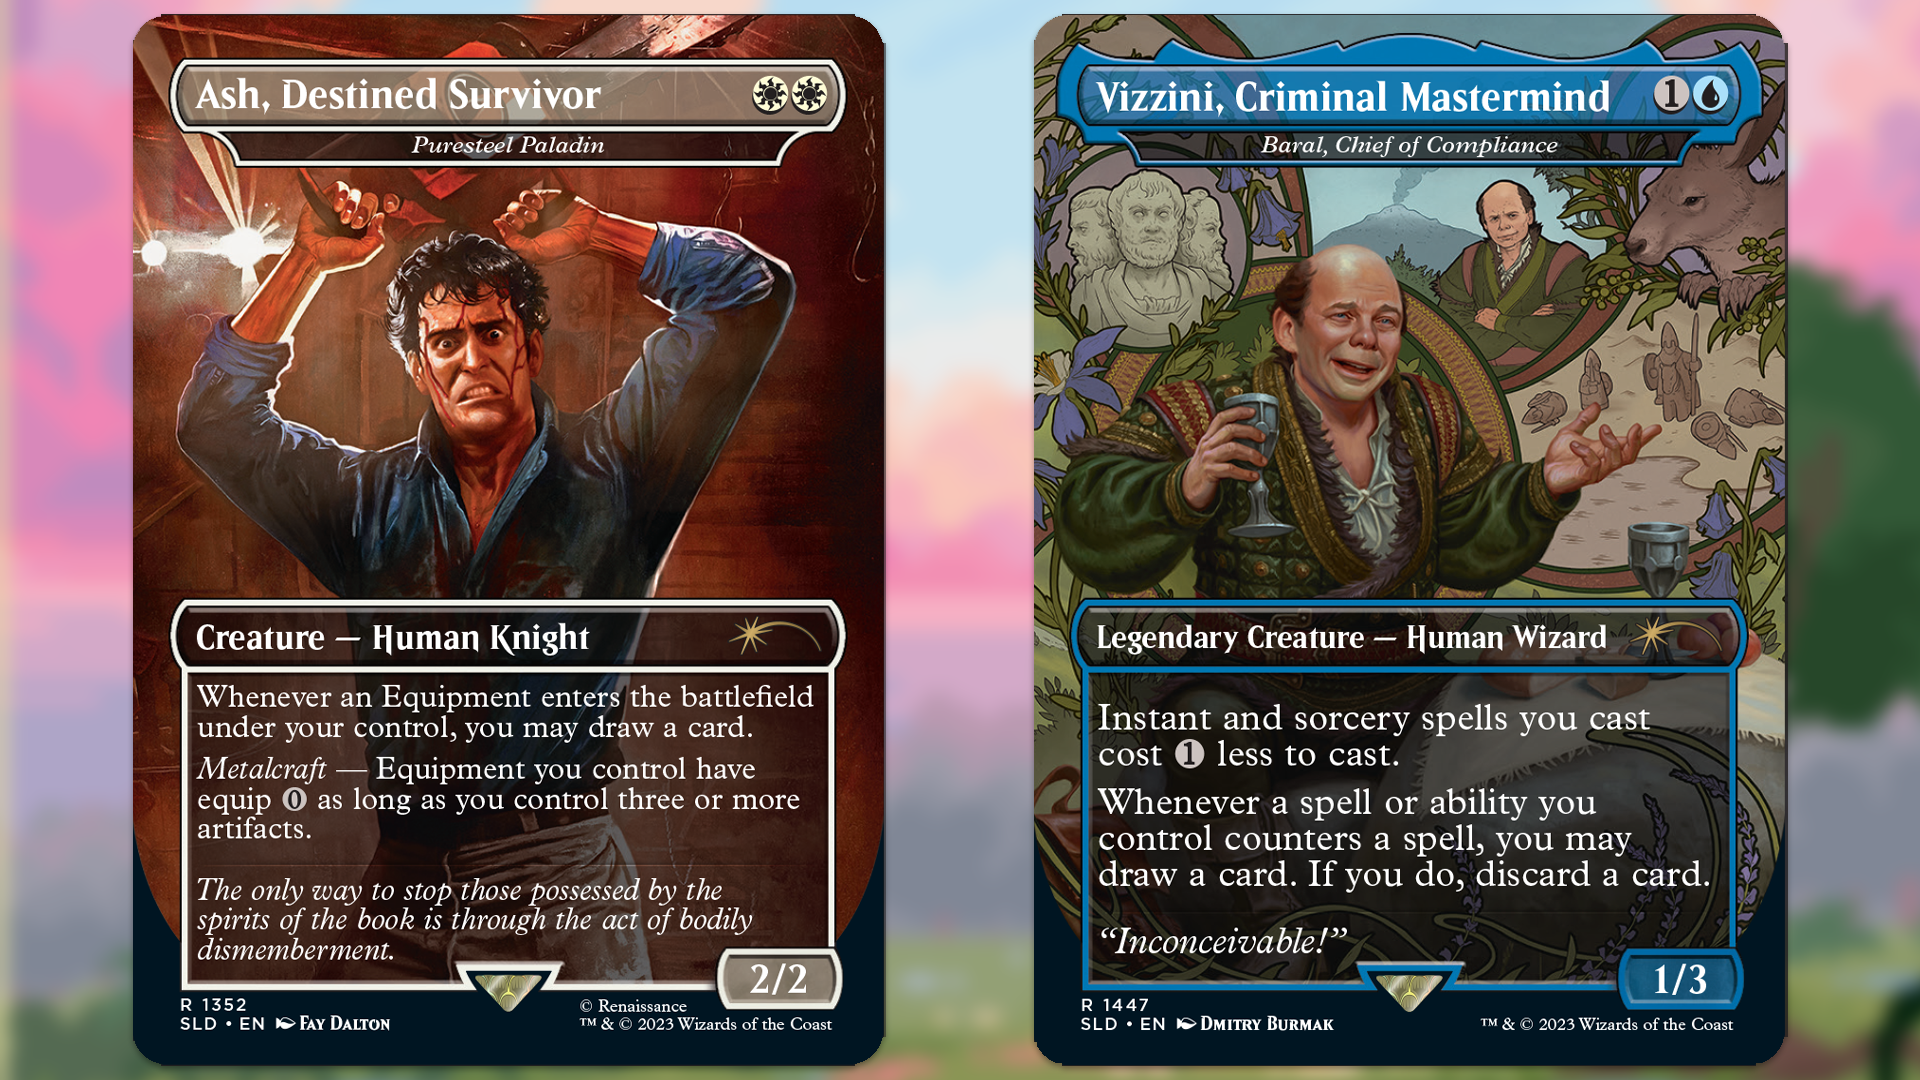 Magic: The Gathering is getting Evil Dead